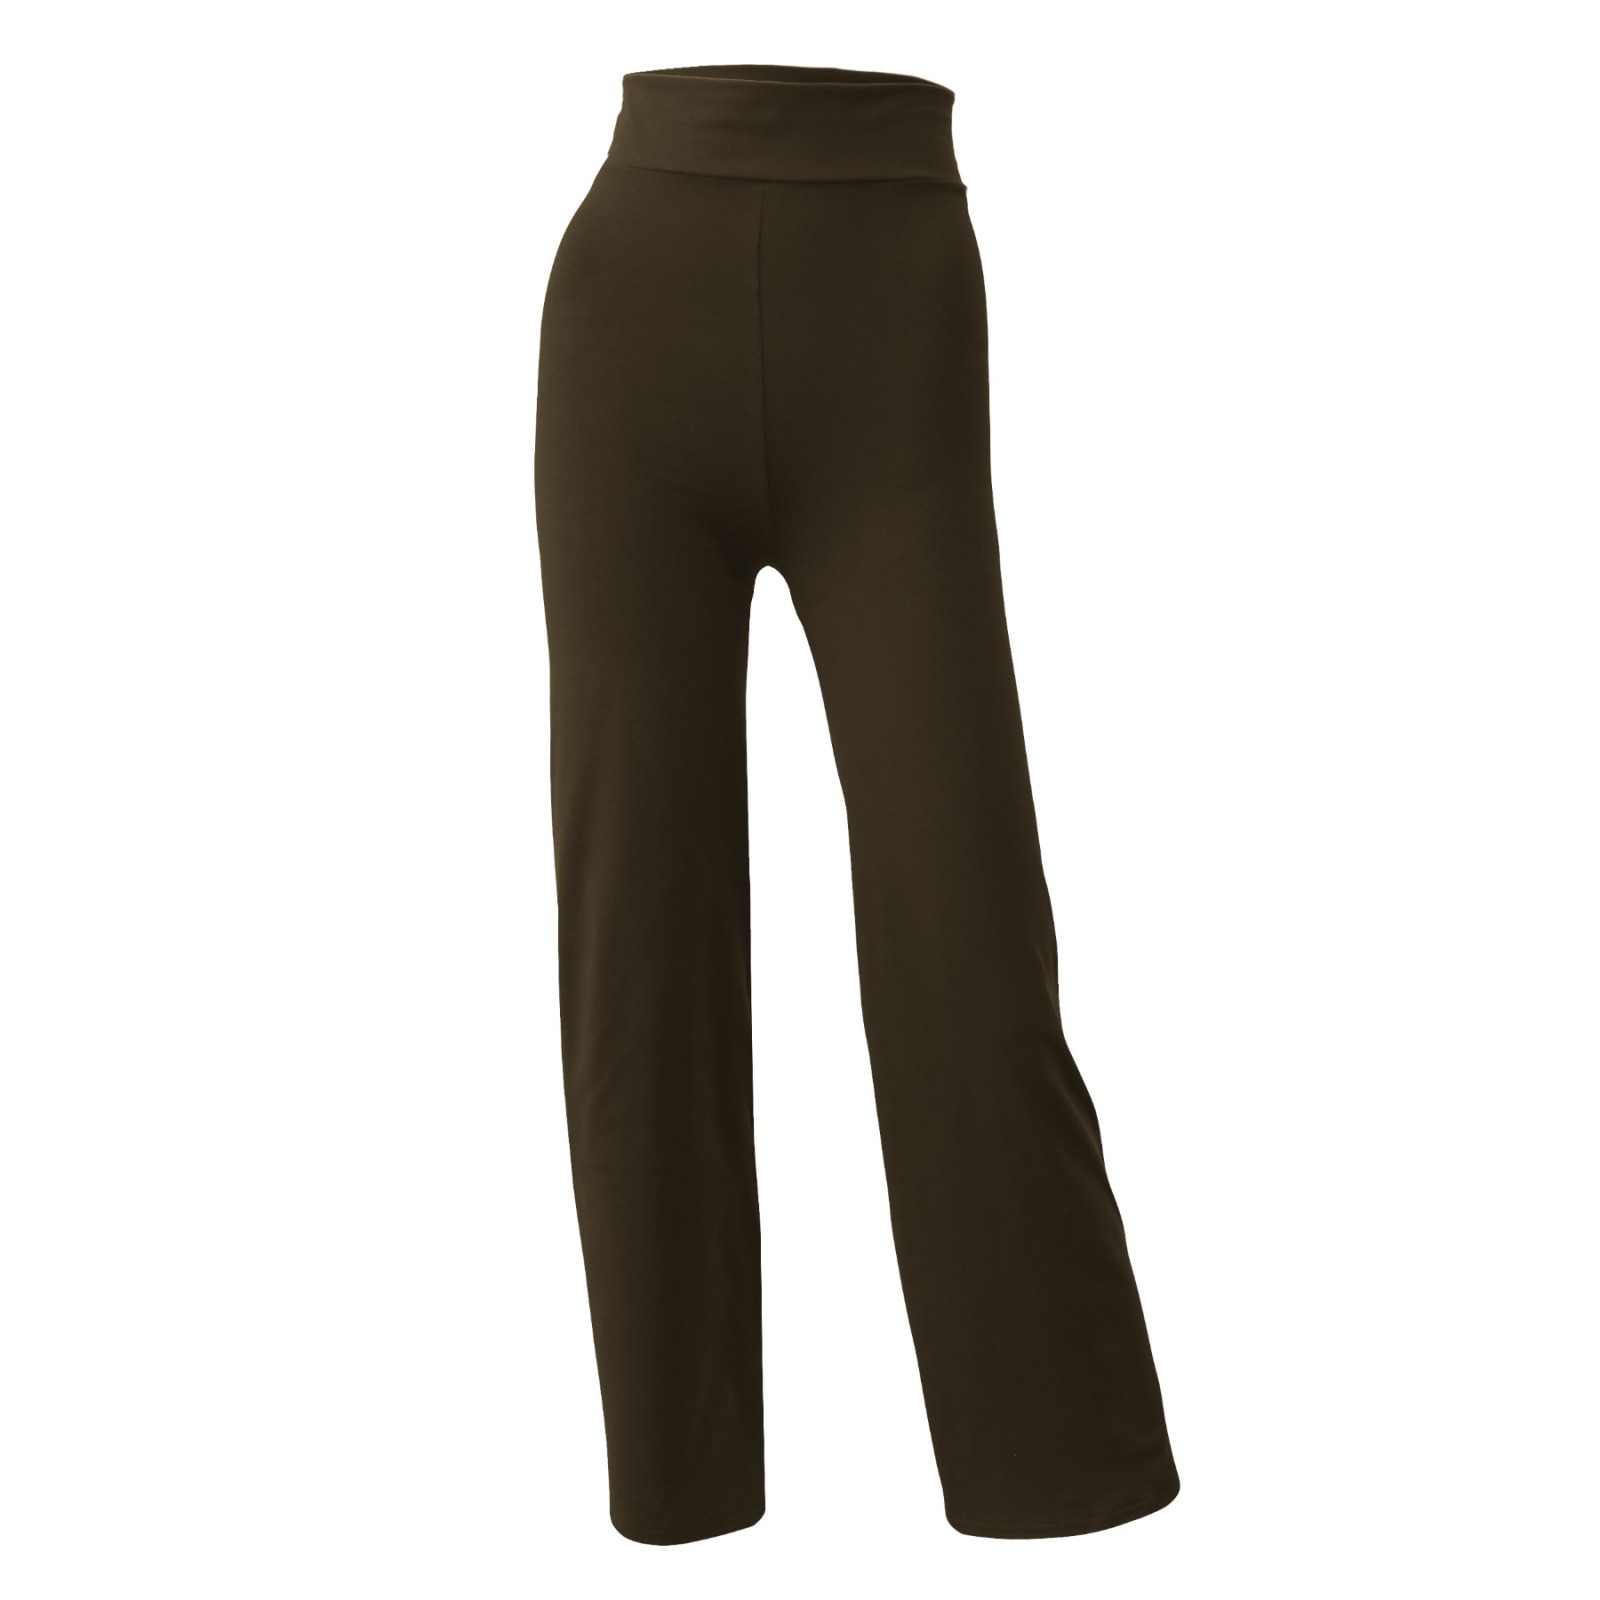 Yoga pants Relaxed Fit forest green